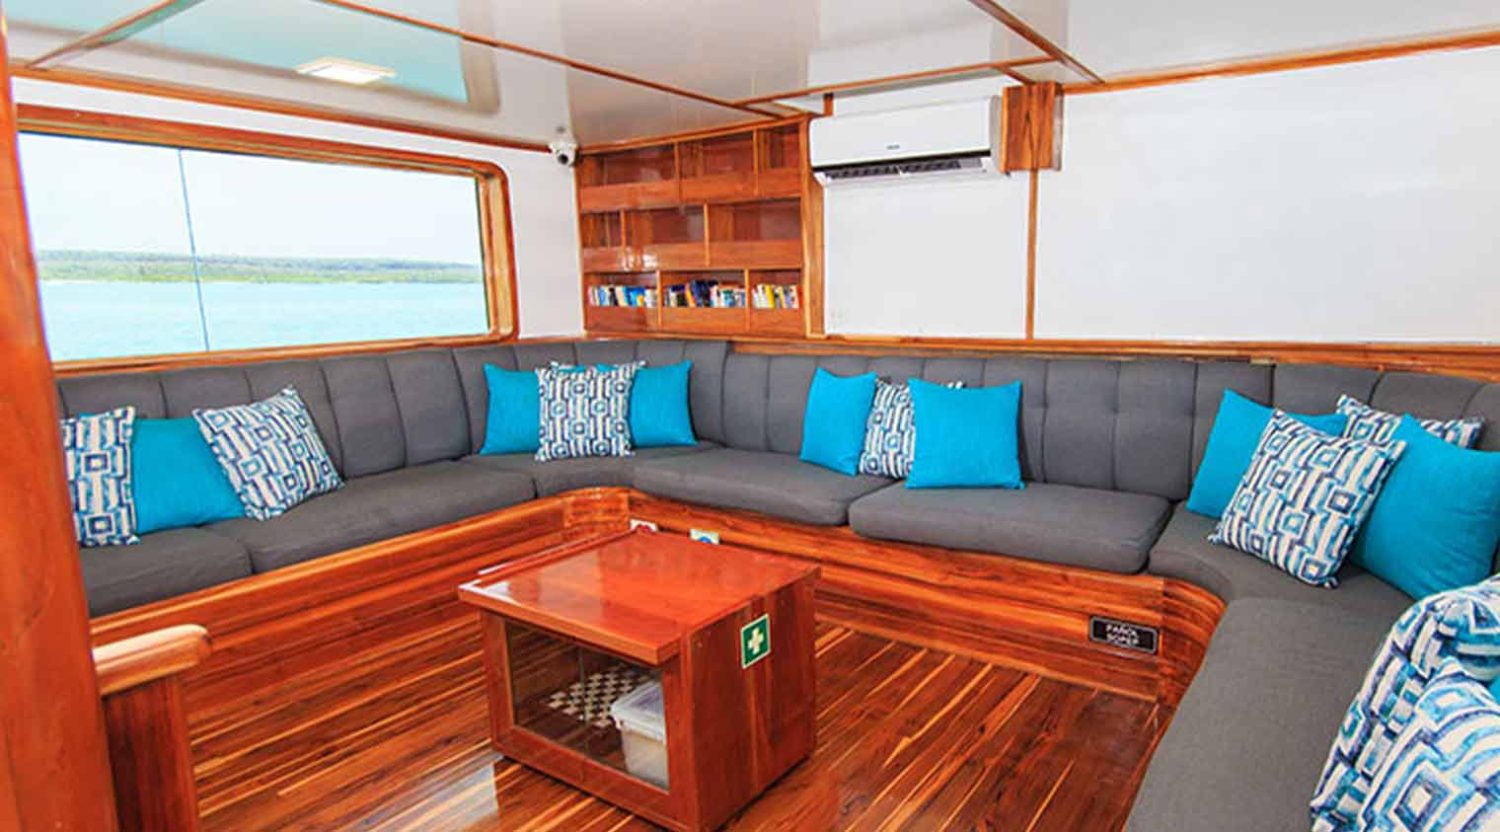 living room of eden yacht of galapagos islands